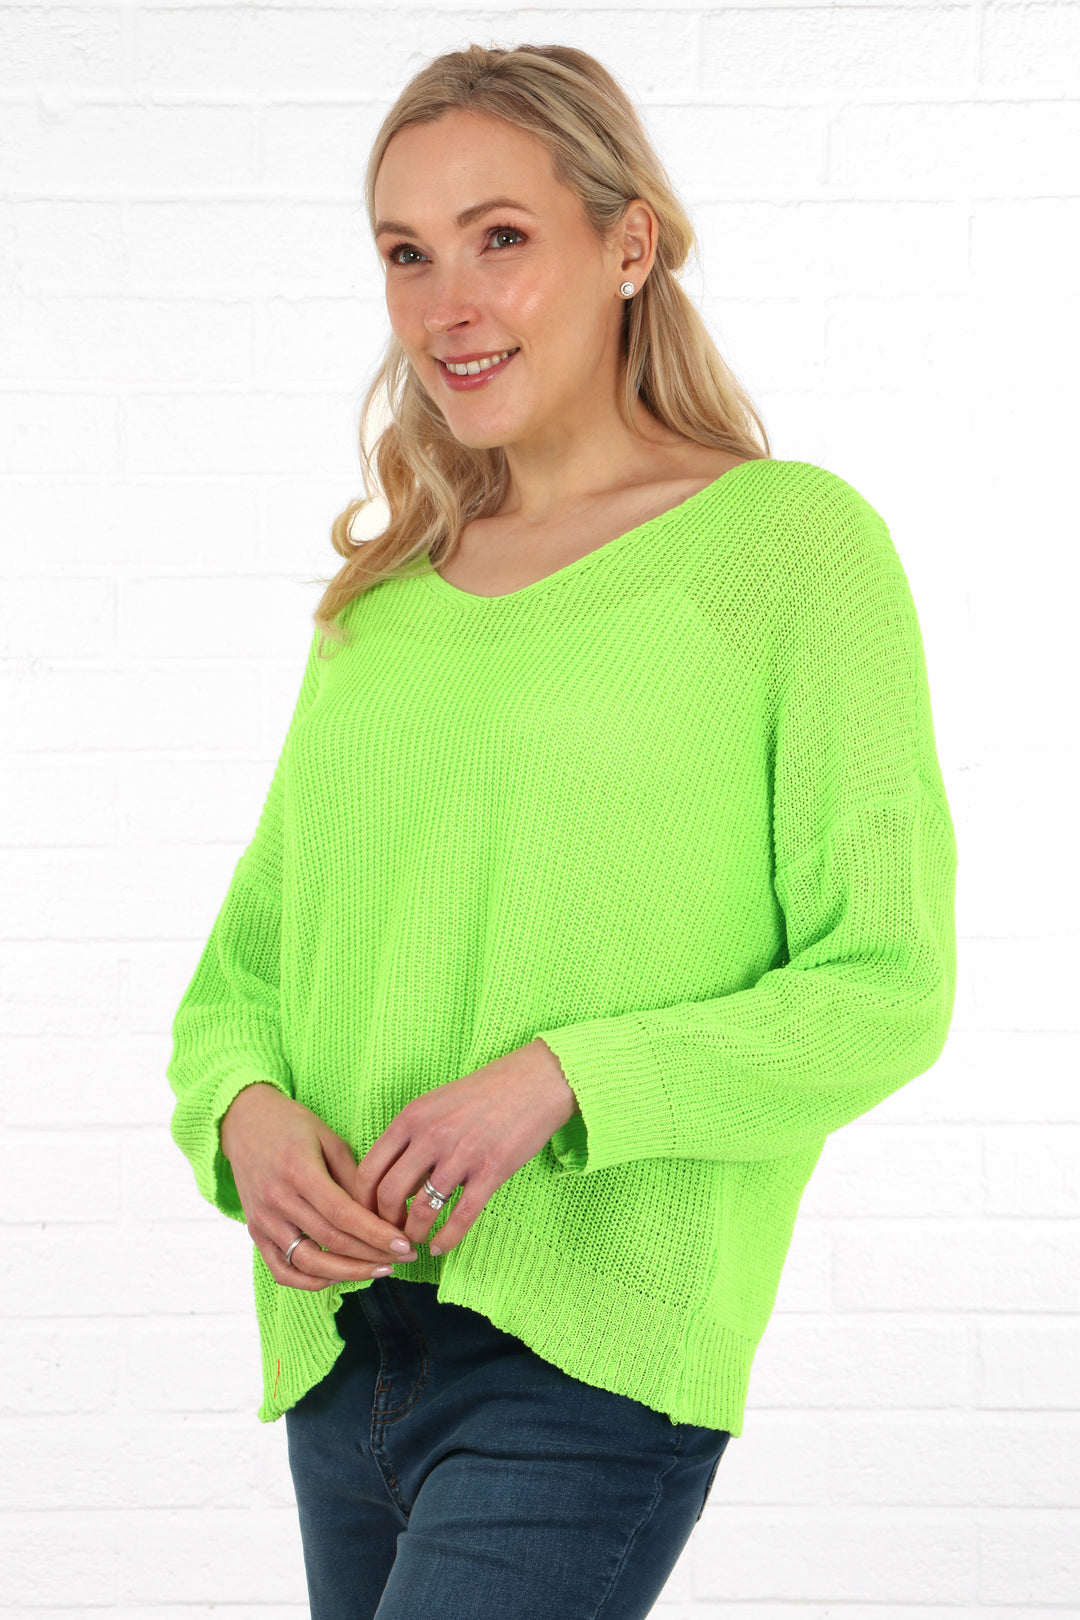 neon lime green cotton knitted jumper with a v neck and long sleeves